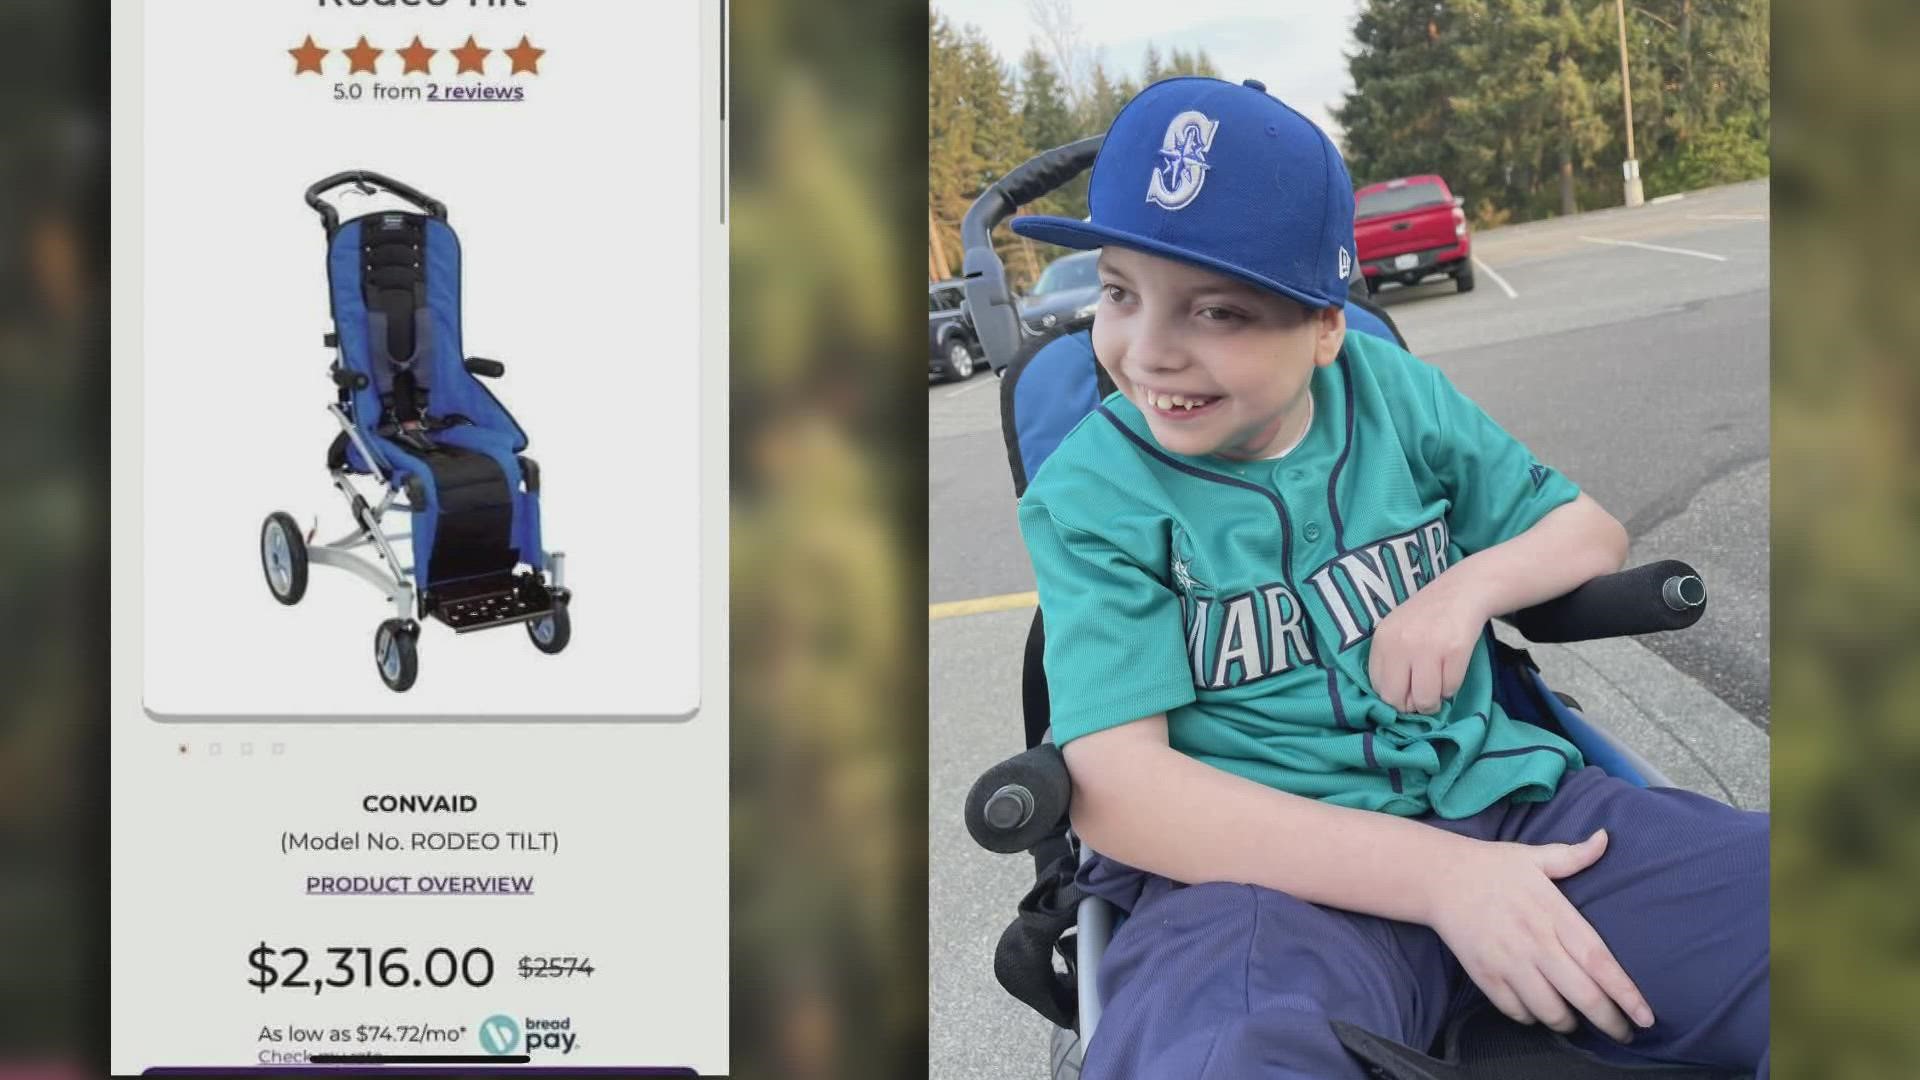 The wheelchair is a crucial piece of equipment for Joey Adams' 11-year-old son Braylon.